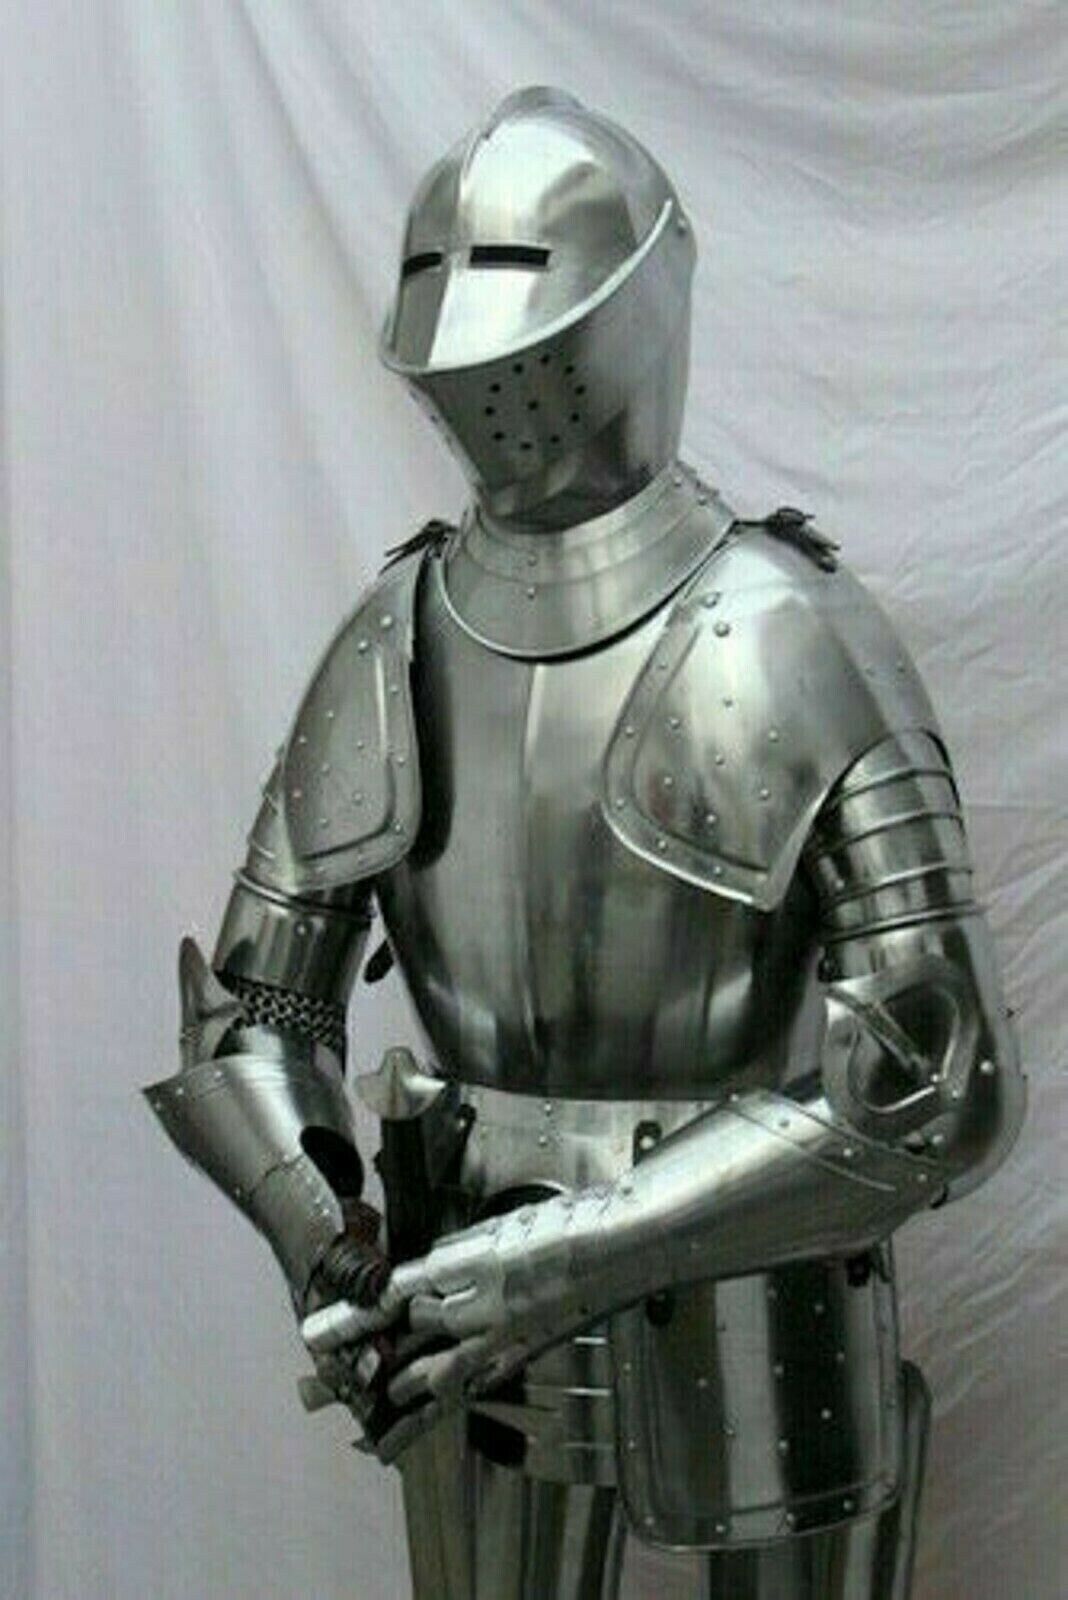 Armor Medieval knight suit of Armor crusader combat full body wearable Suit